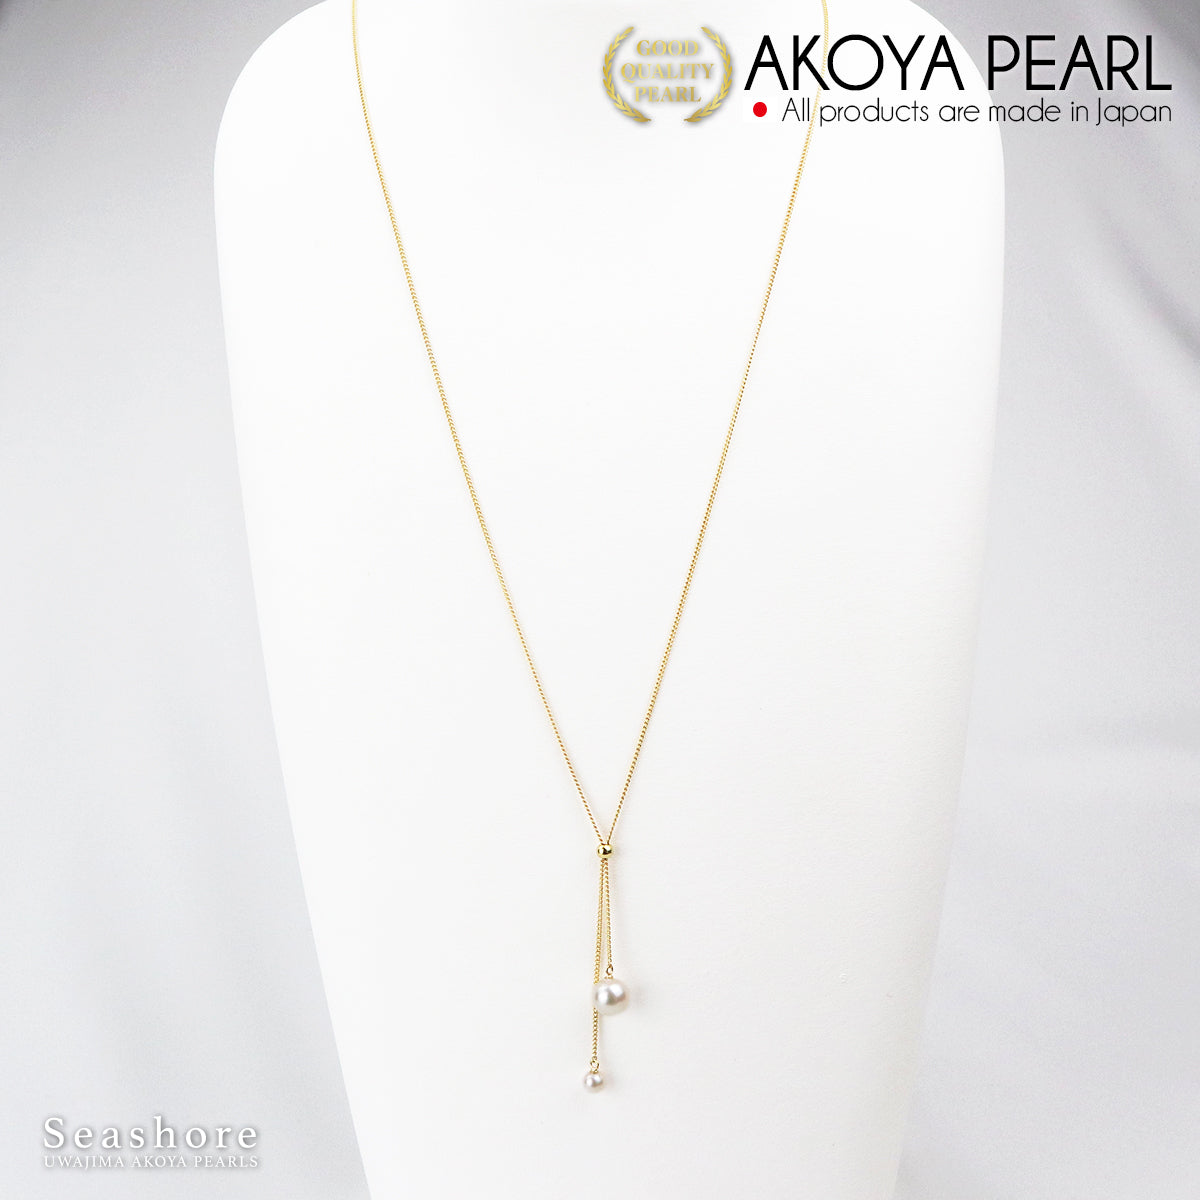 2 Akoya Pearls Long Chain Necklace [5.0-9.0mm] Brass Silver/Gold [2 Colors Available] Pearl Necklace